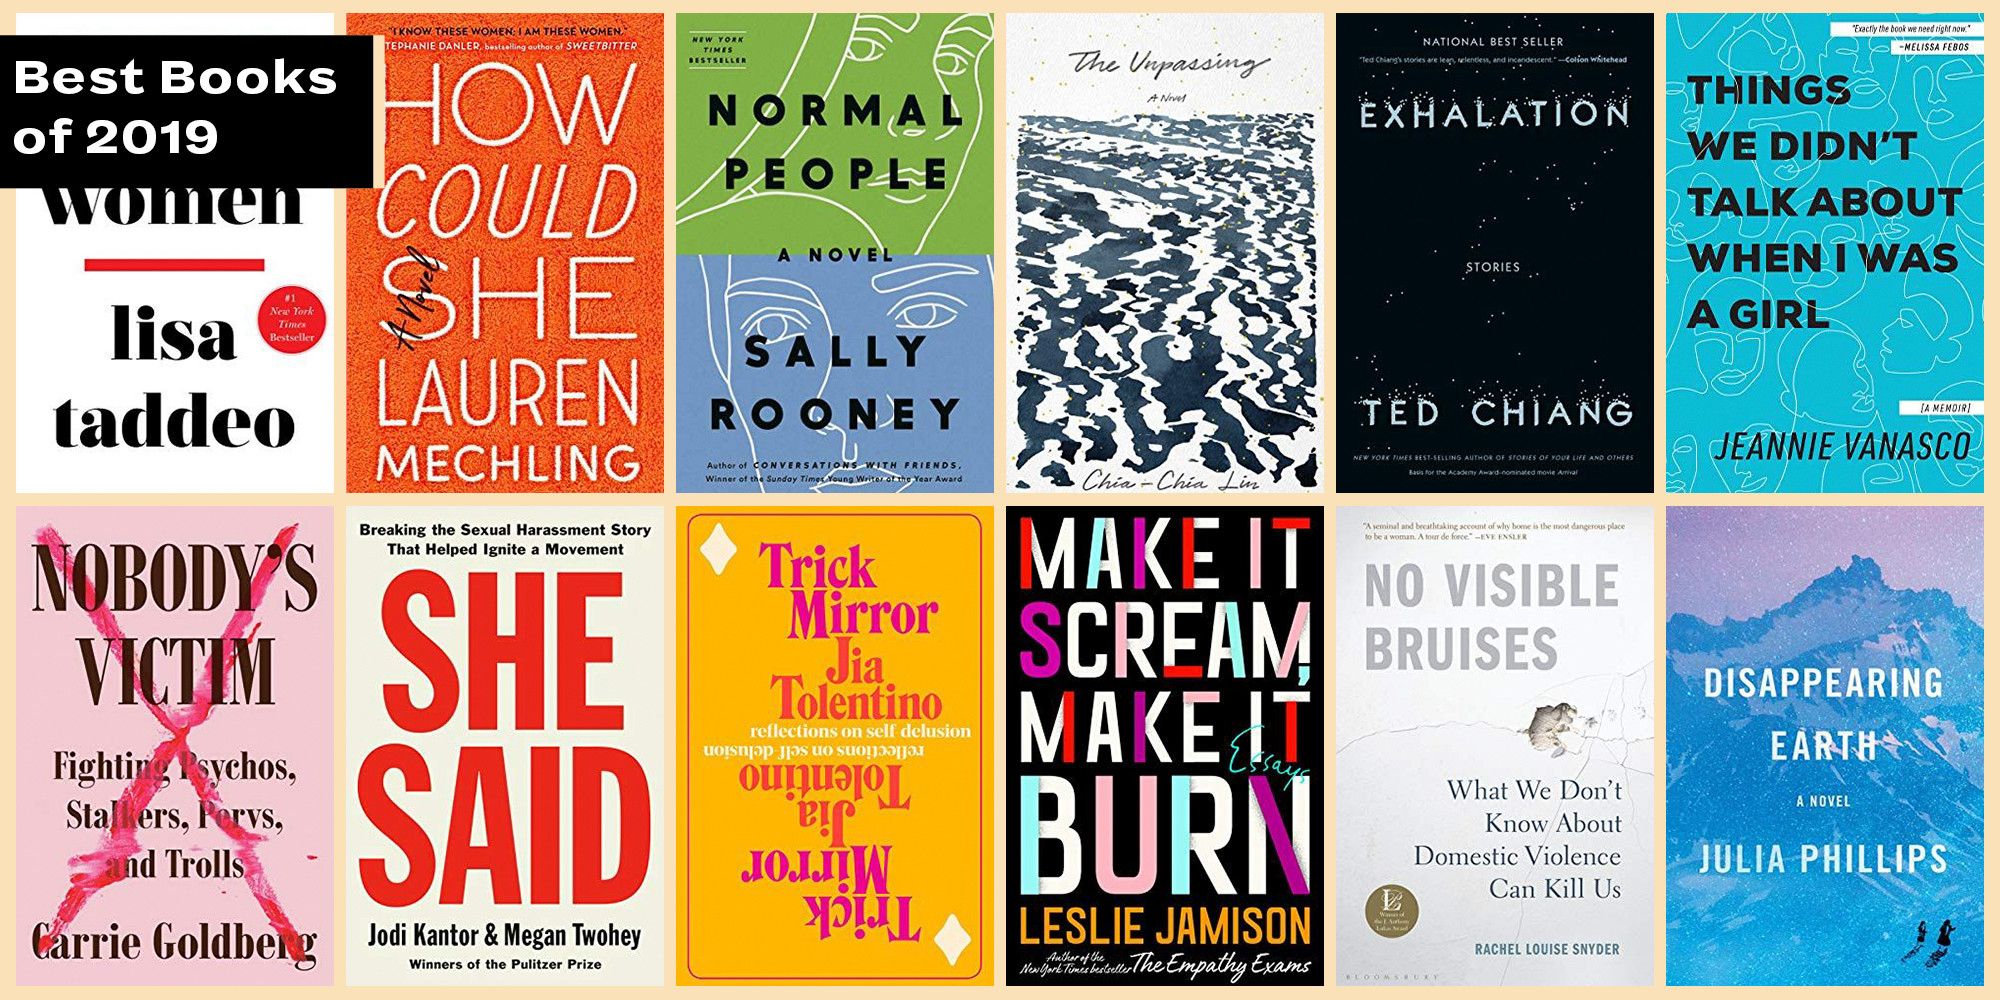 Skole lærer karton Kammer 50 Best Books of 2019 - Top New Book Releases to Read in 2019 Year